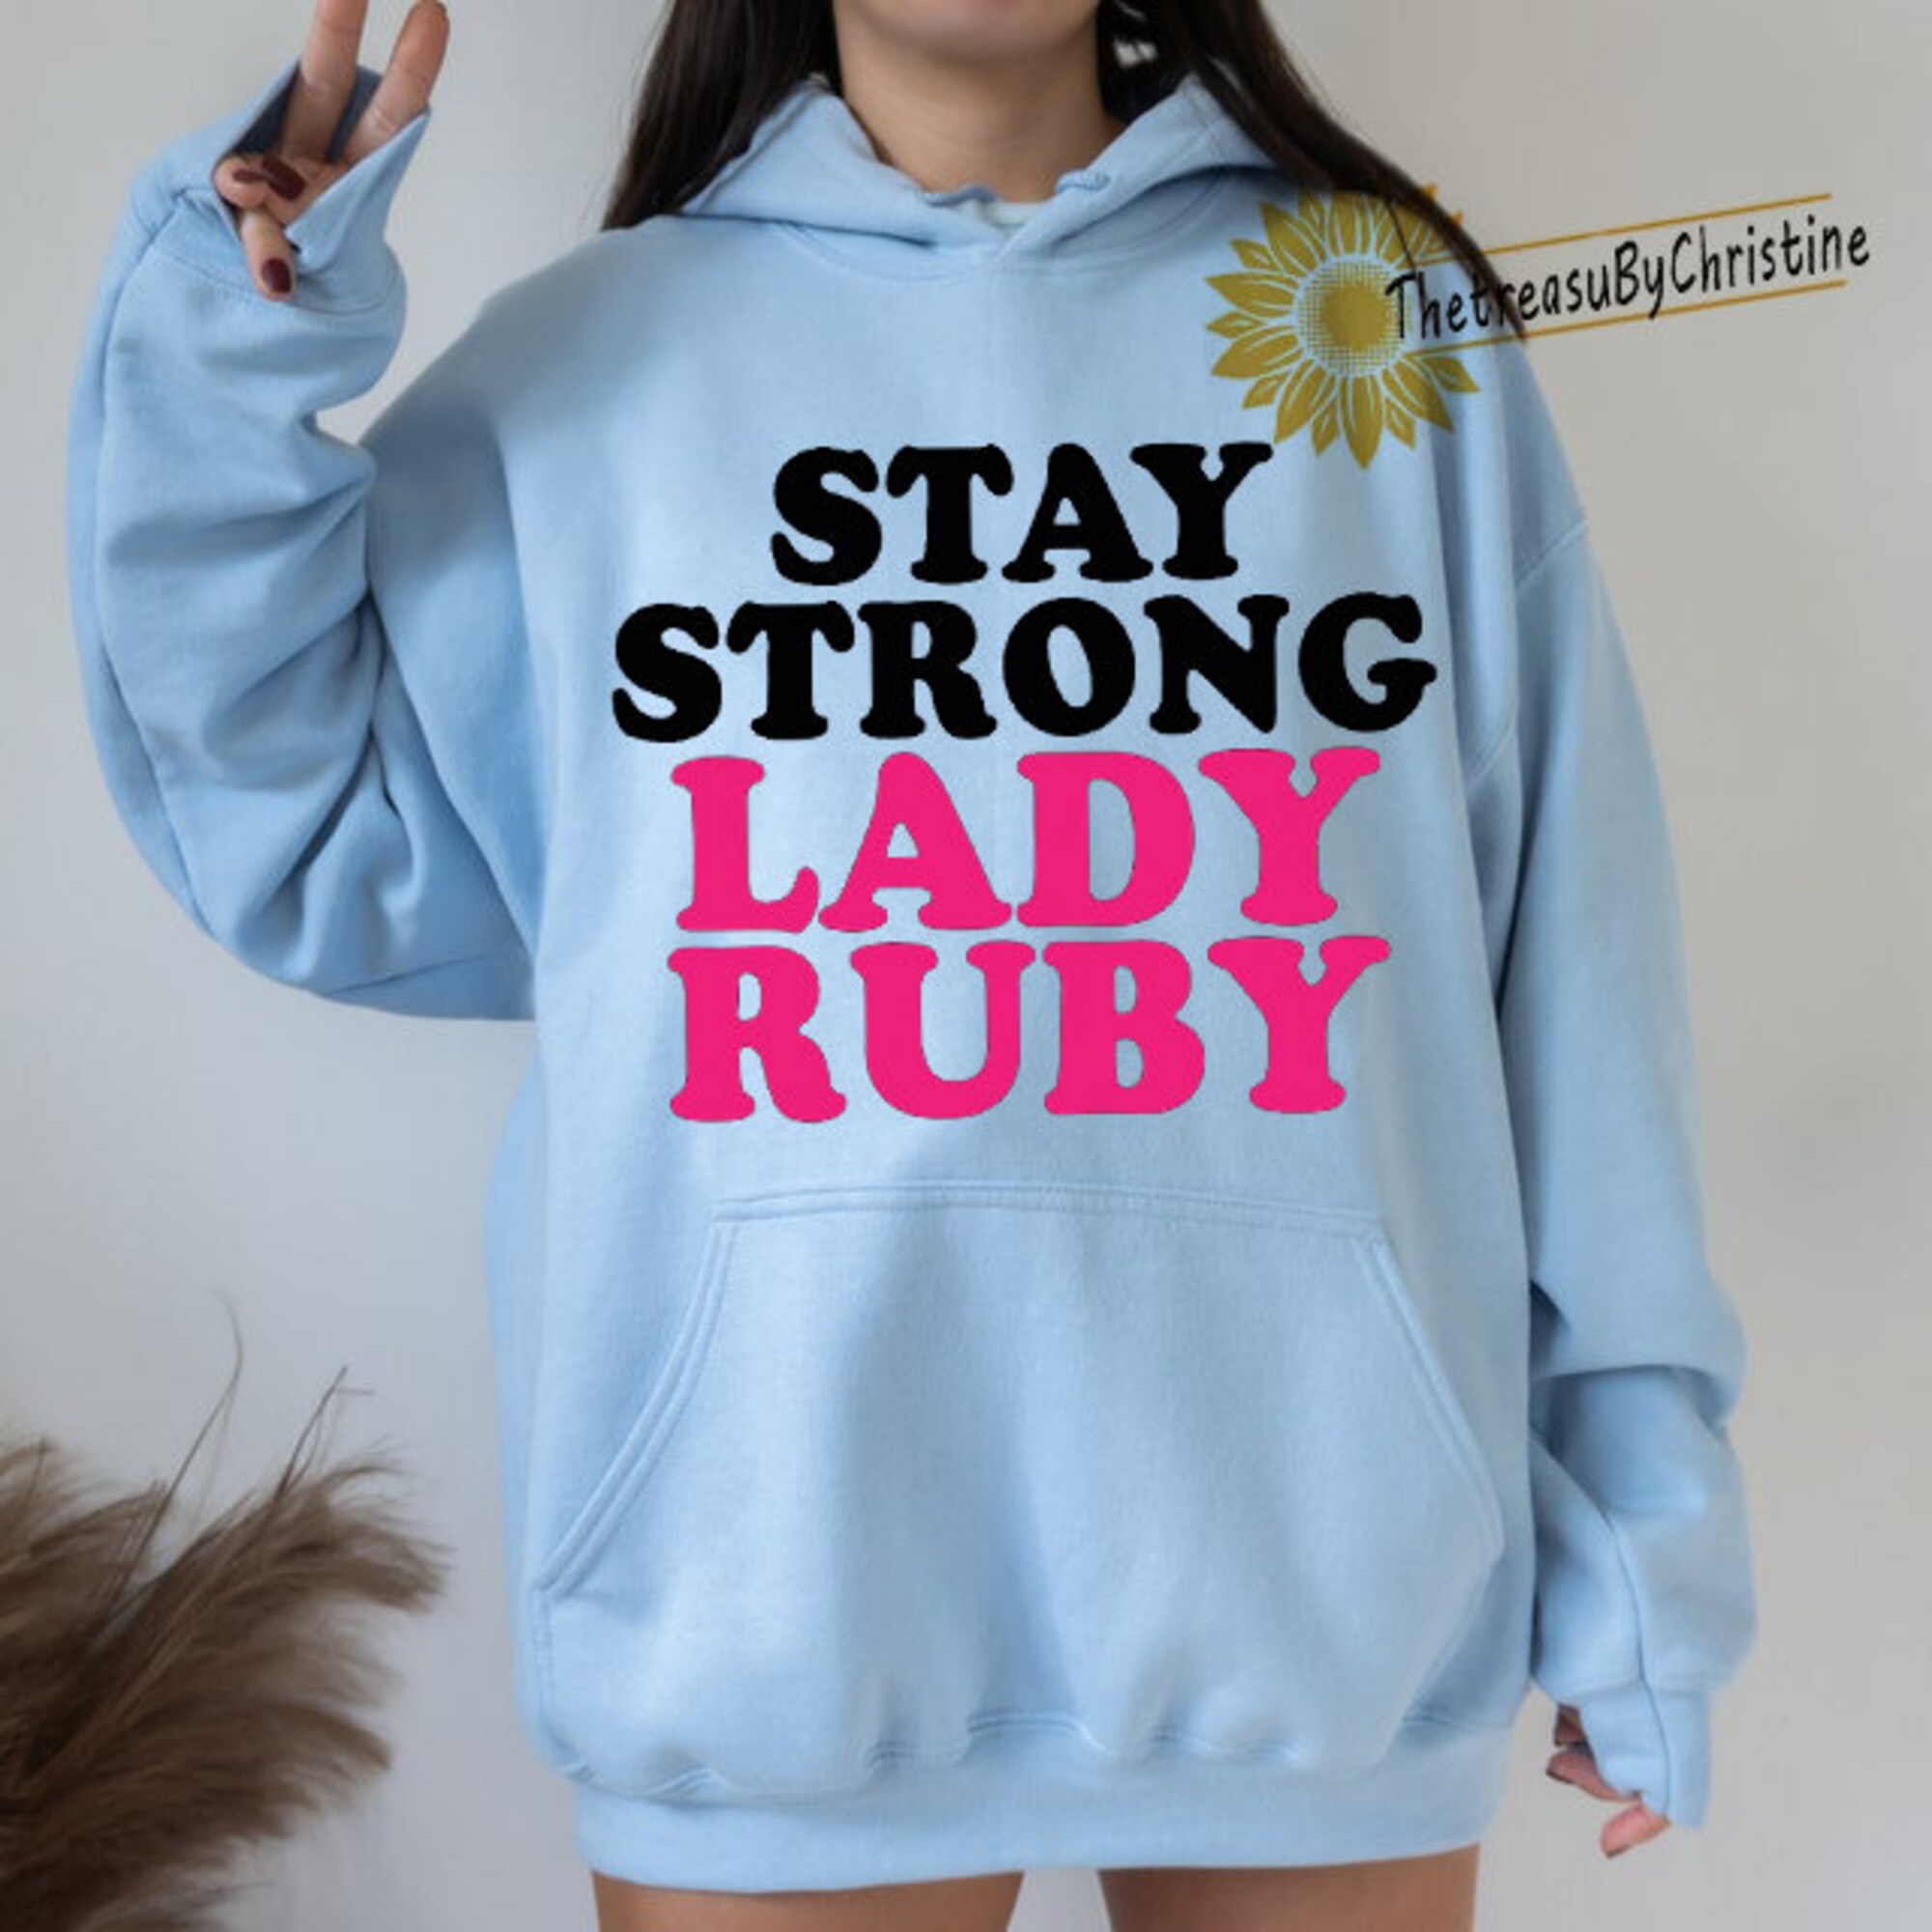 Stay Strong Lady Ruby Shirt, Justice For Lady Ruby, Freeman Ladies Shirt